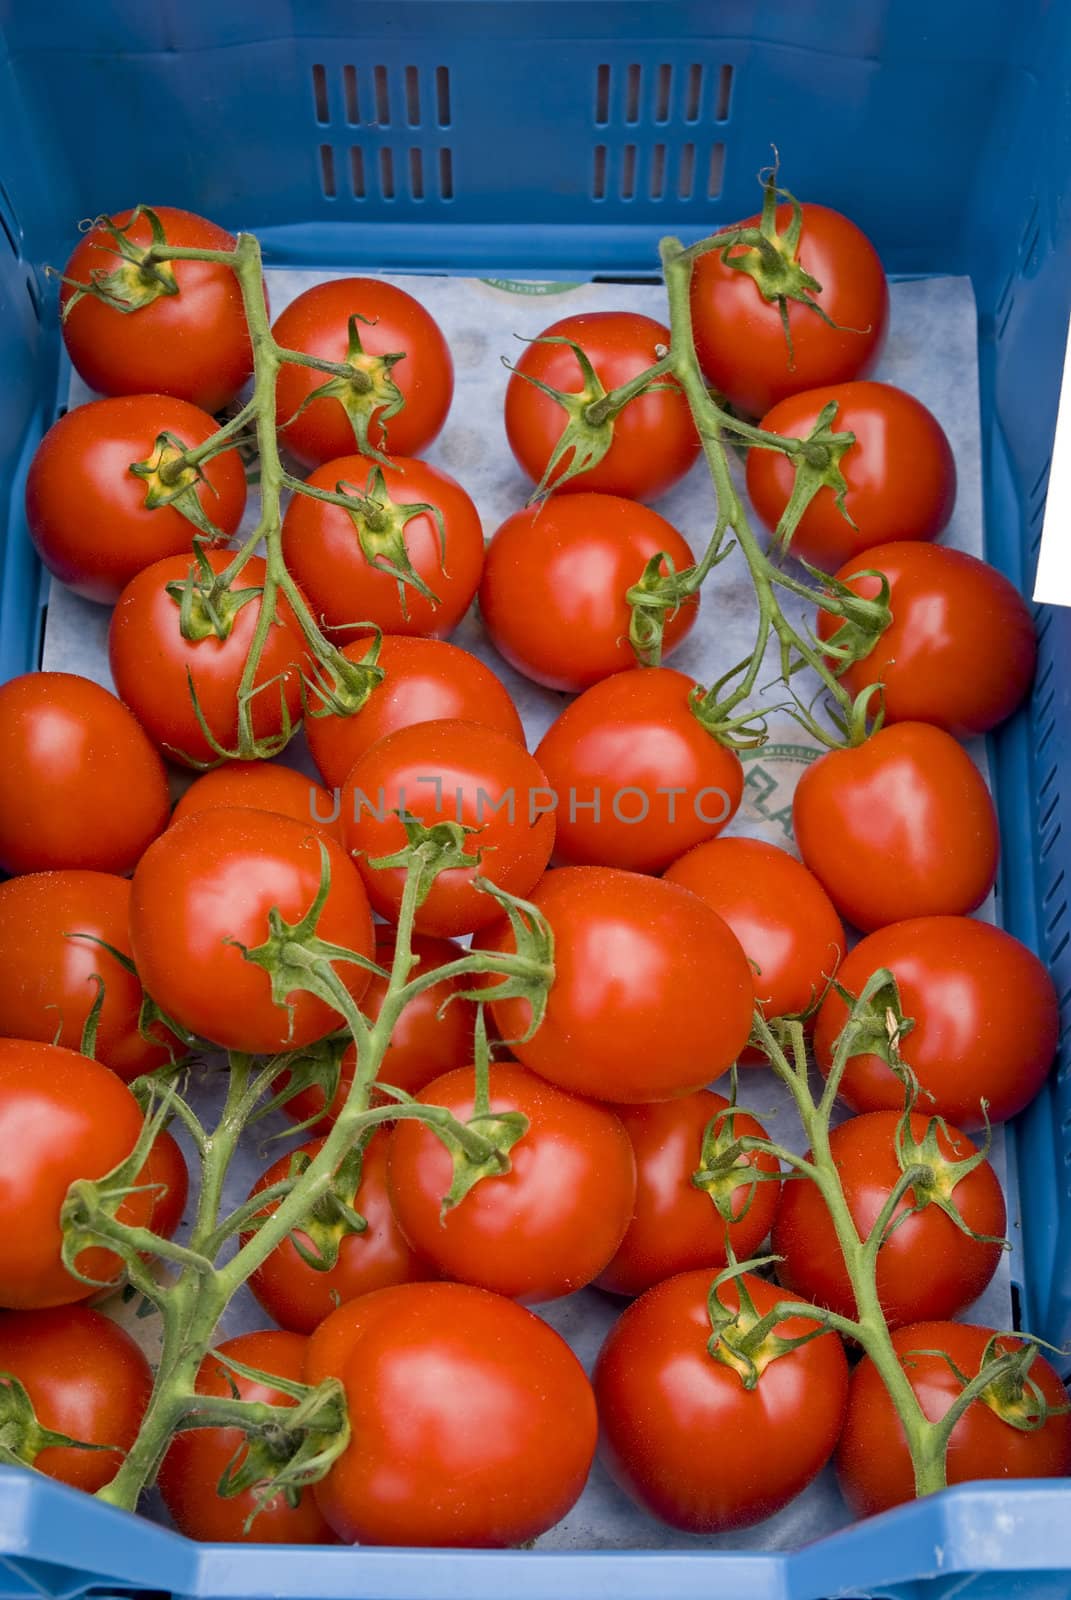 Tomatoes by Gertje